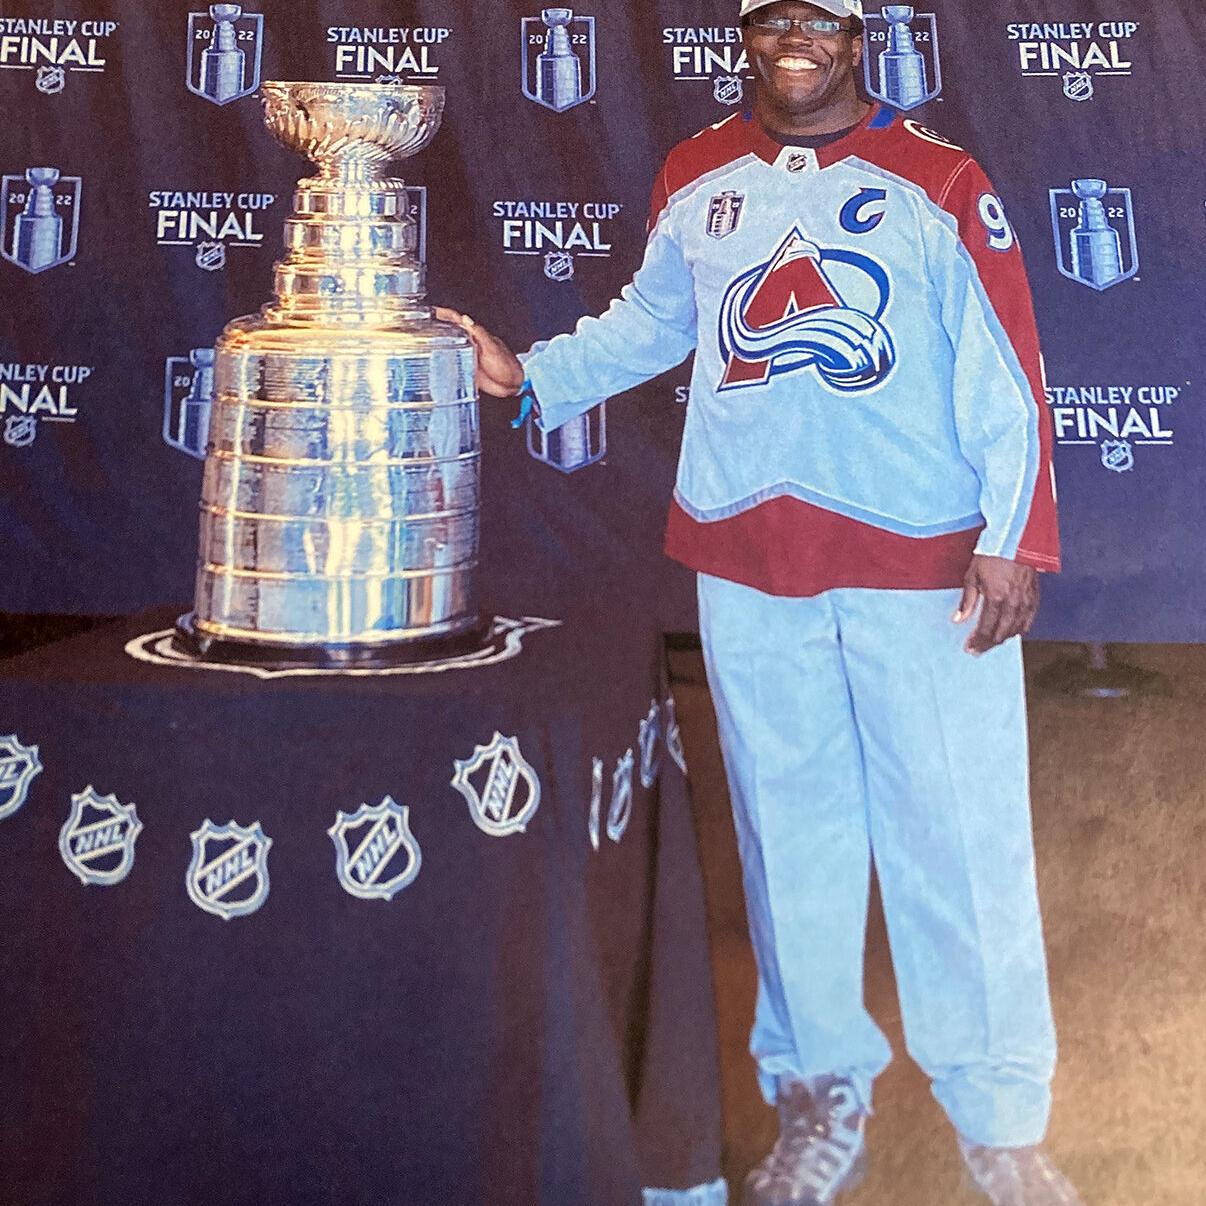 Mini franchise story: My expansion team made it to the Stanley Cup final in  their second season and dethroned the Tampa Bay Lightning who were primed  for a 4-peat. My AHL team